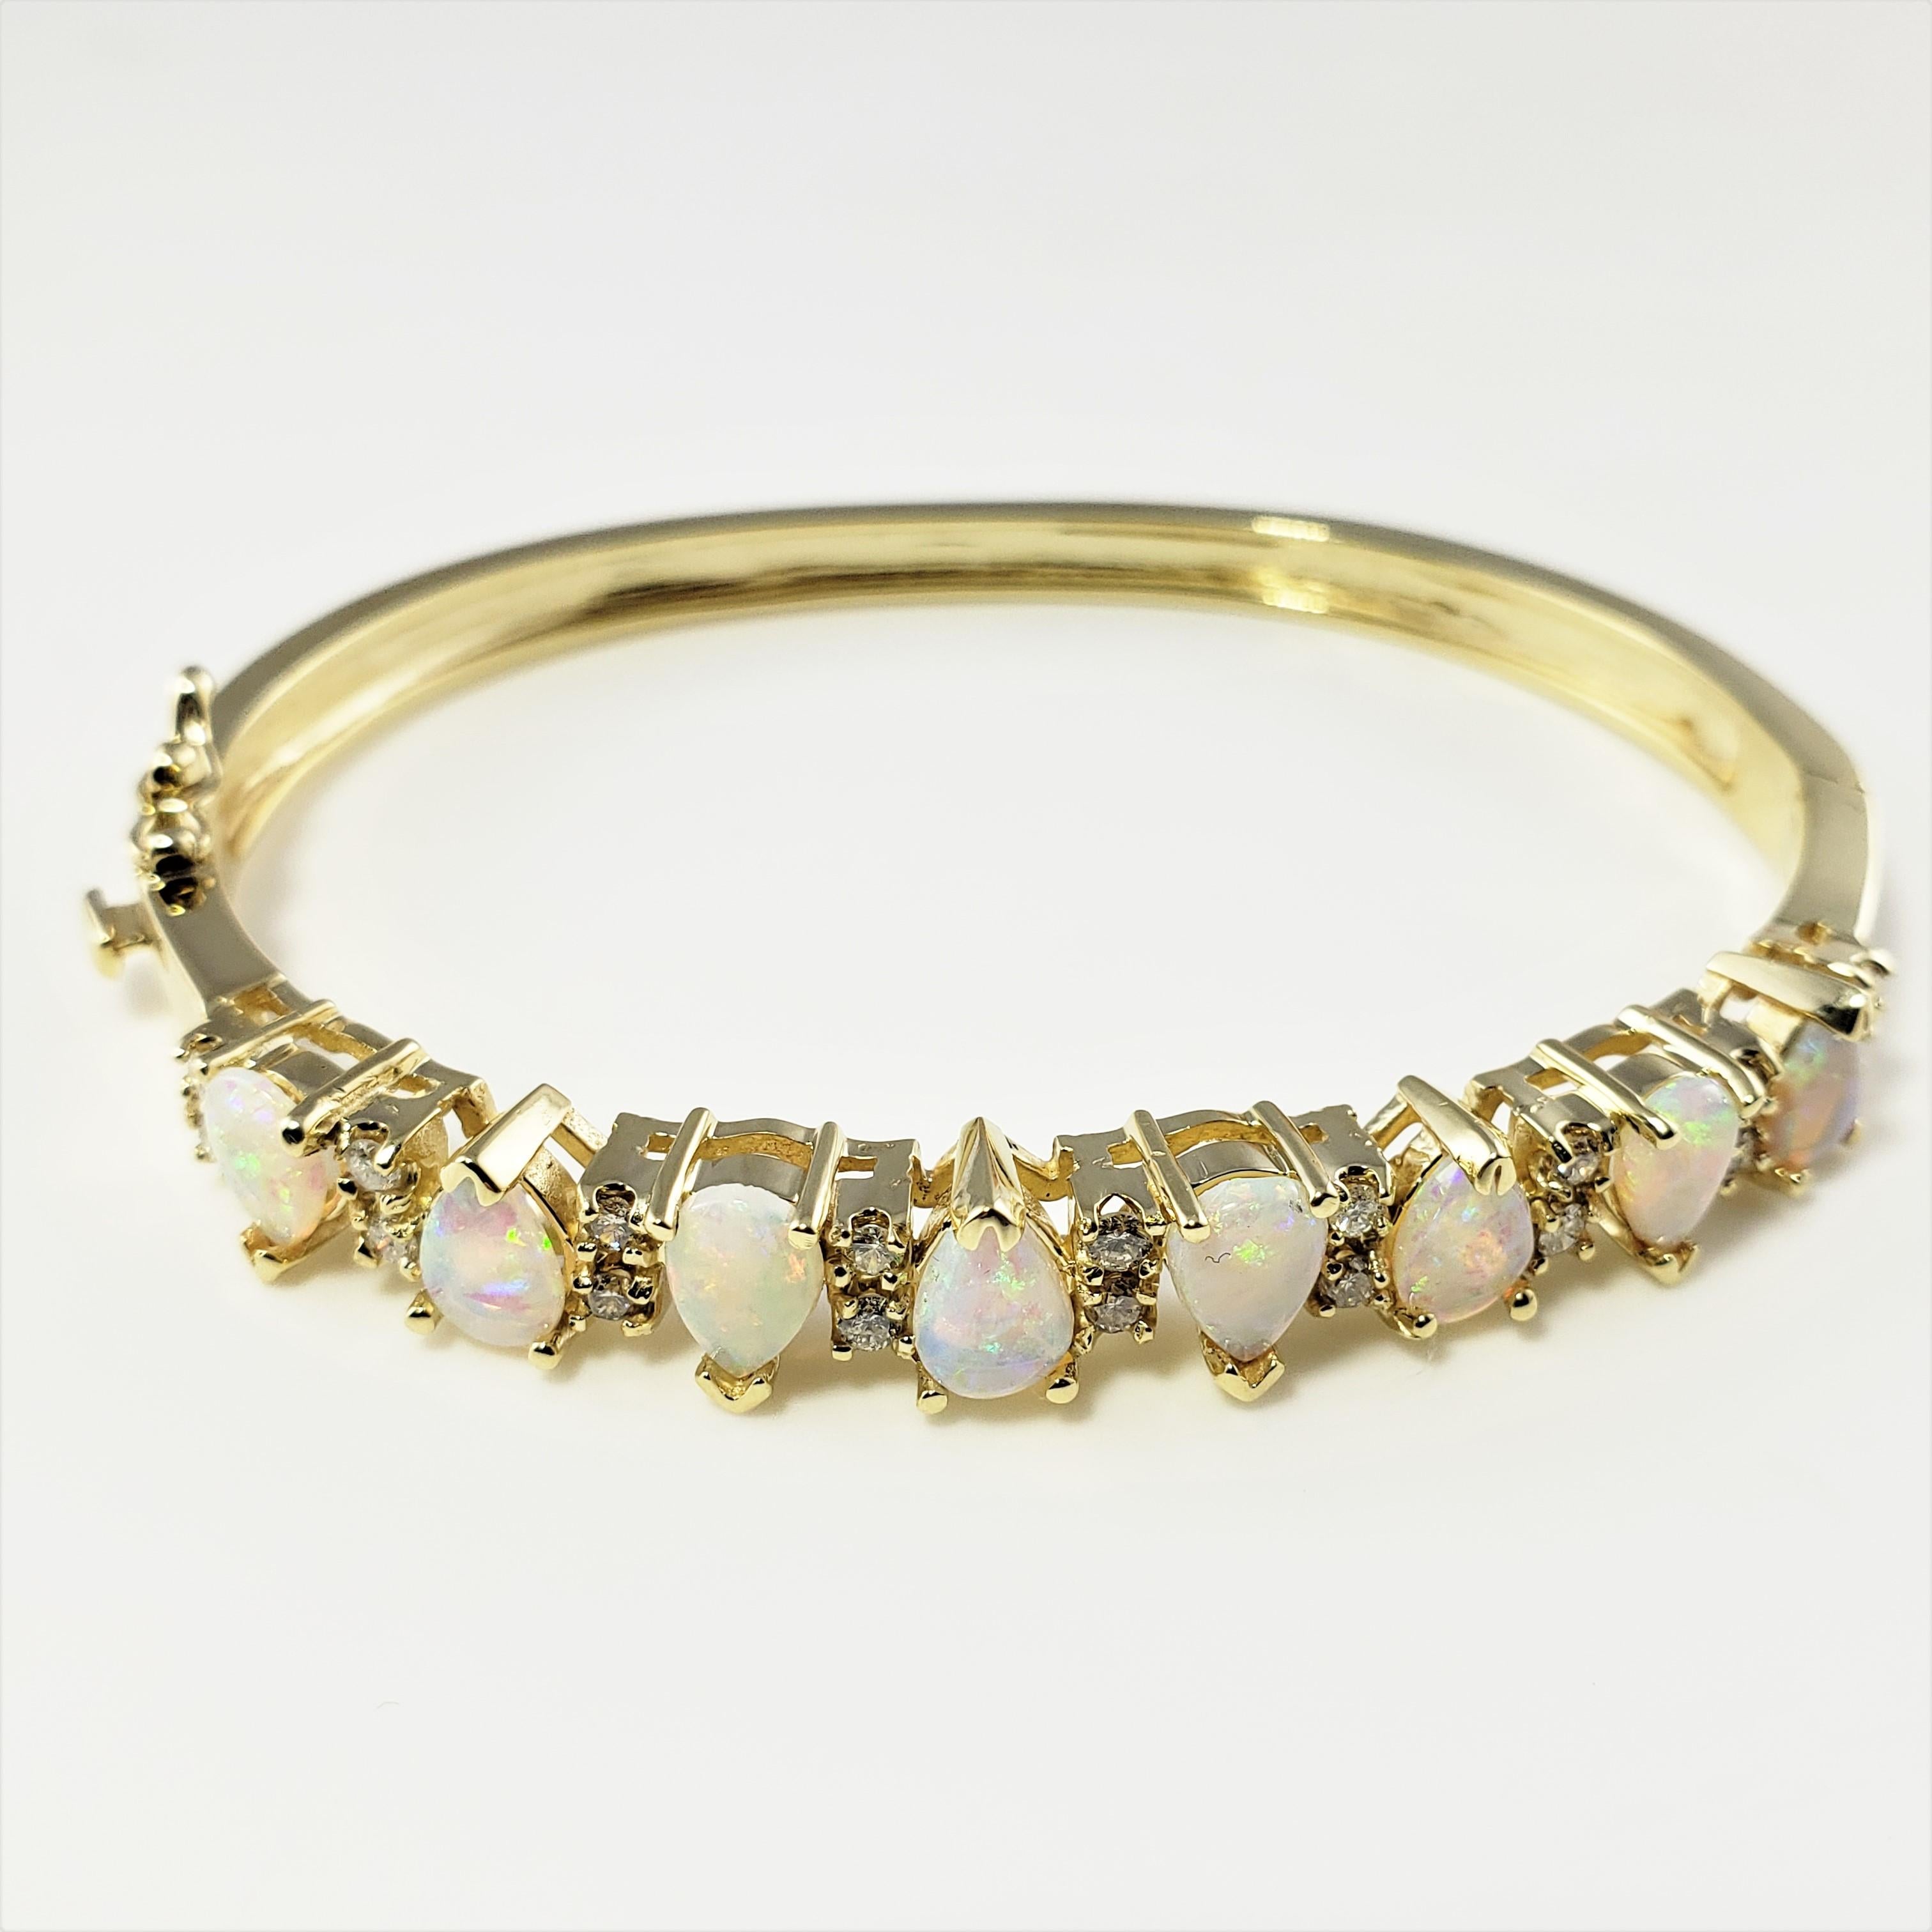 14 Karat Yellow Gold Opal and Diamond Bangle Bracelet-

This stunning hinged bangle bracelet features eight pear shaped opals (8 mm x 5 mm each) and 21 round brilliant cut diamonds set in classic 14K yellow gold.  Width:  8 mm.

Approximate total